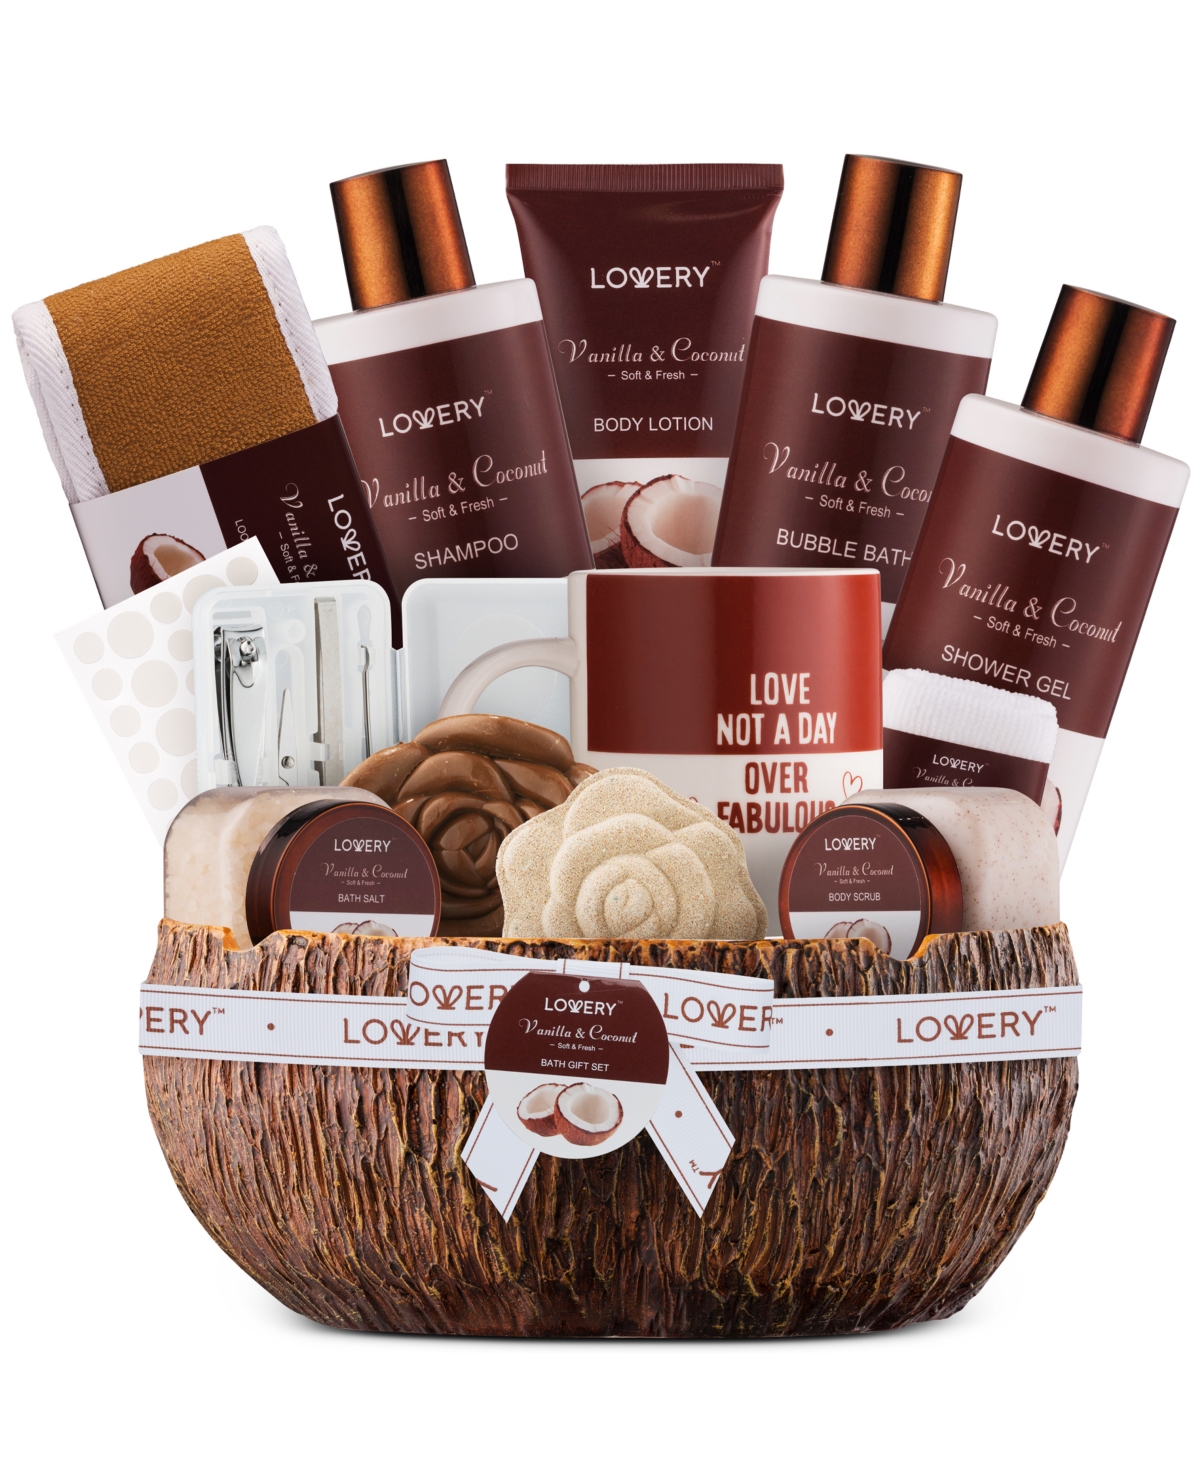 Lovery Men's Gift Set, Bath and Shower Gift Basket, Coconut Body Care Set, Personal Self Care Kit with Ash Tray, 18 Piece